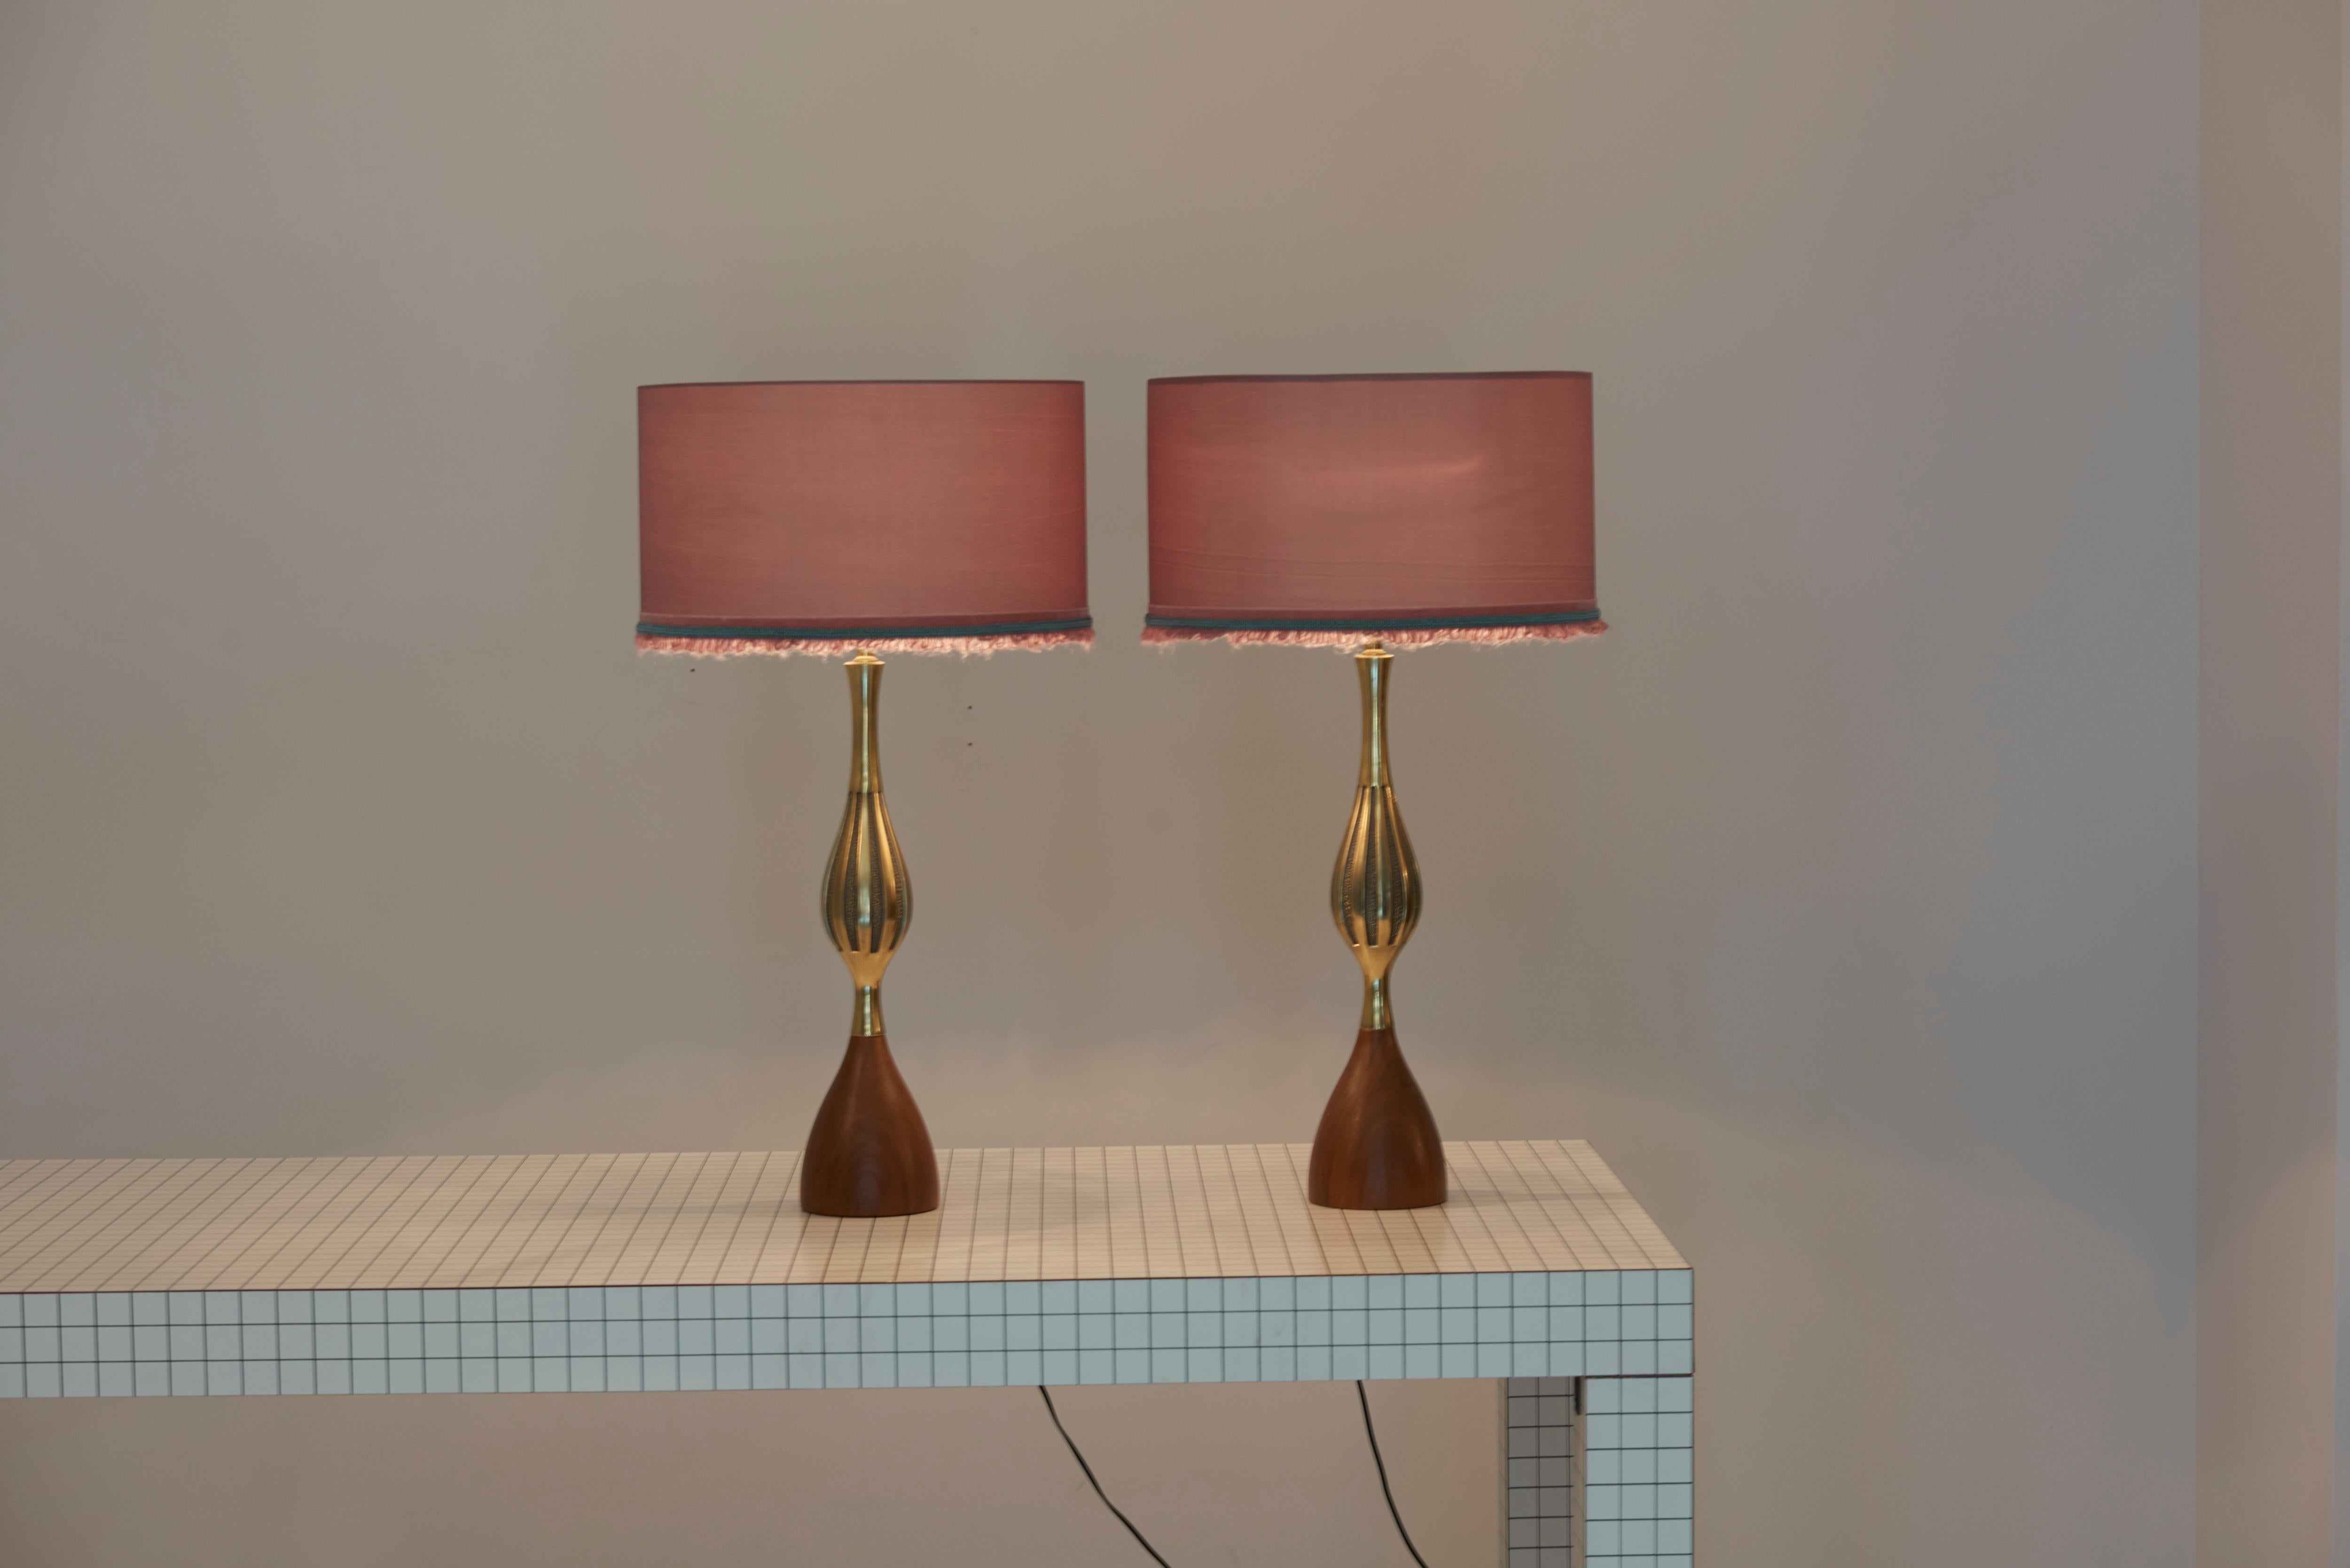 Pair of large table lamps in brass and walnut, designed by Tony Paul and manufactured by Westwood Lighting.
Including new custom lampshades.

1 x E27 socket / each.

Please note: Lamp should be fitted professionally in accordance to local